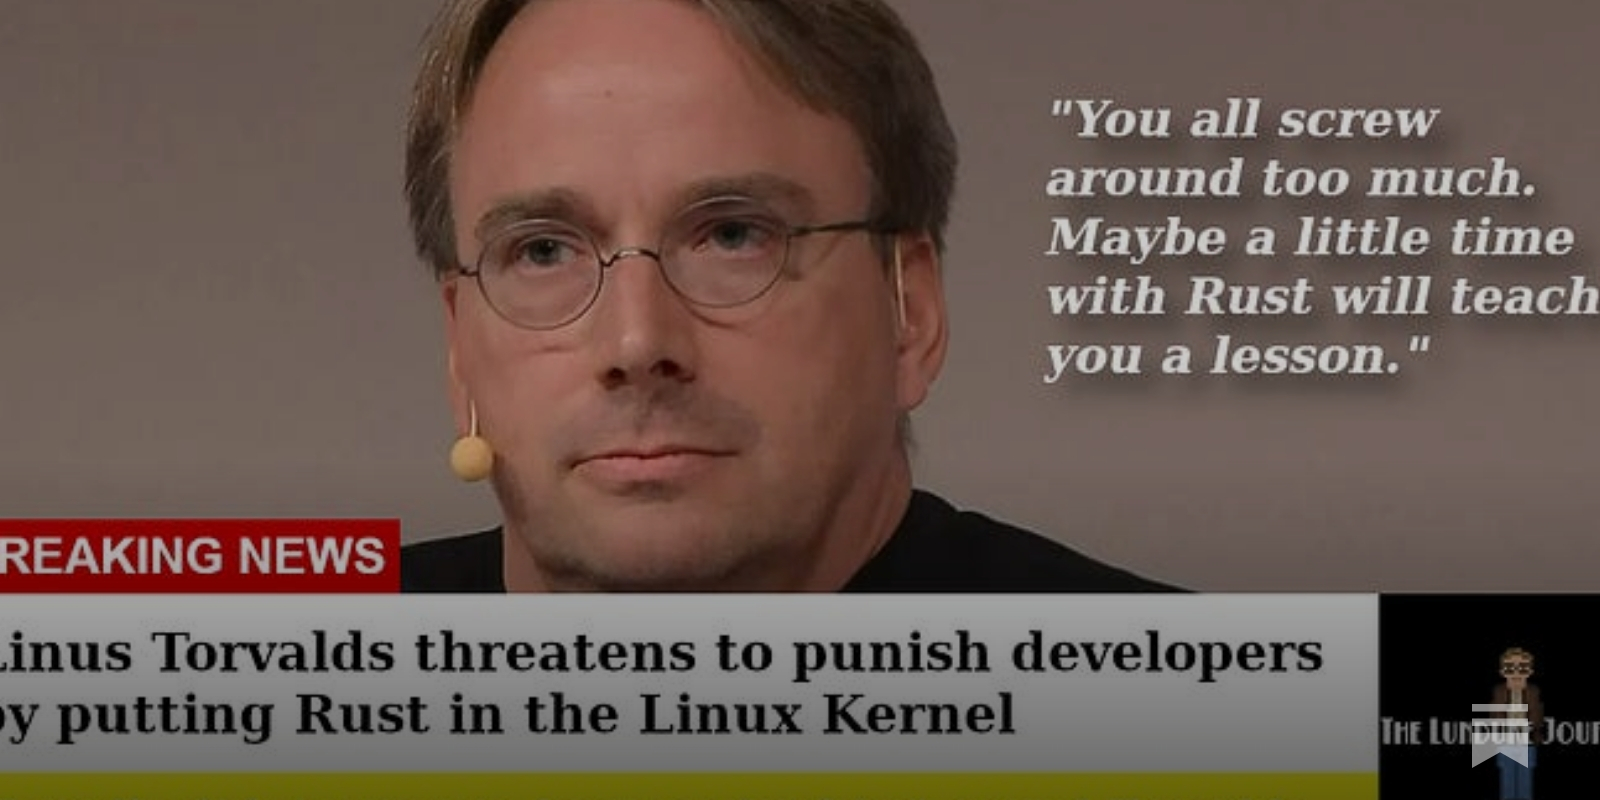 Linus Torvalds threatens to punish developers by putting Rust in the Linux Kernel